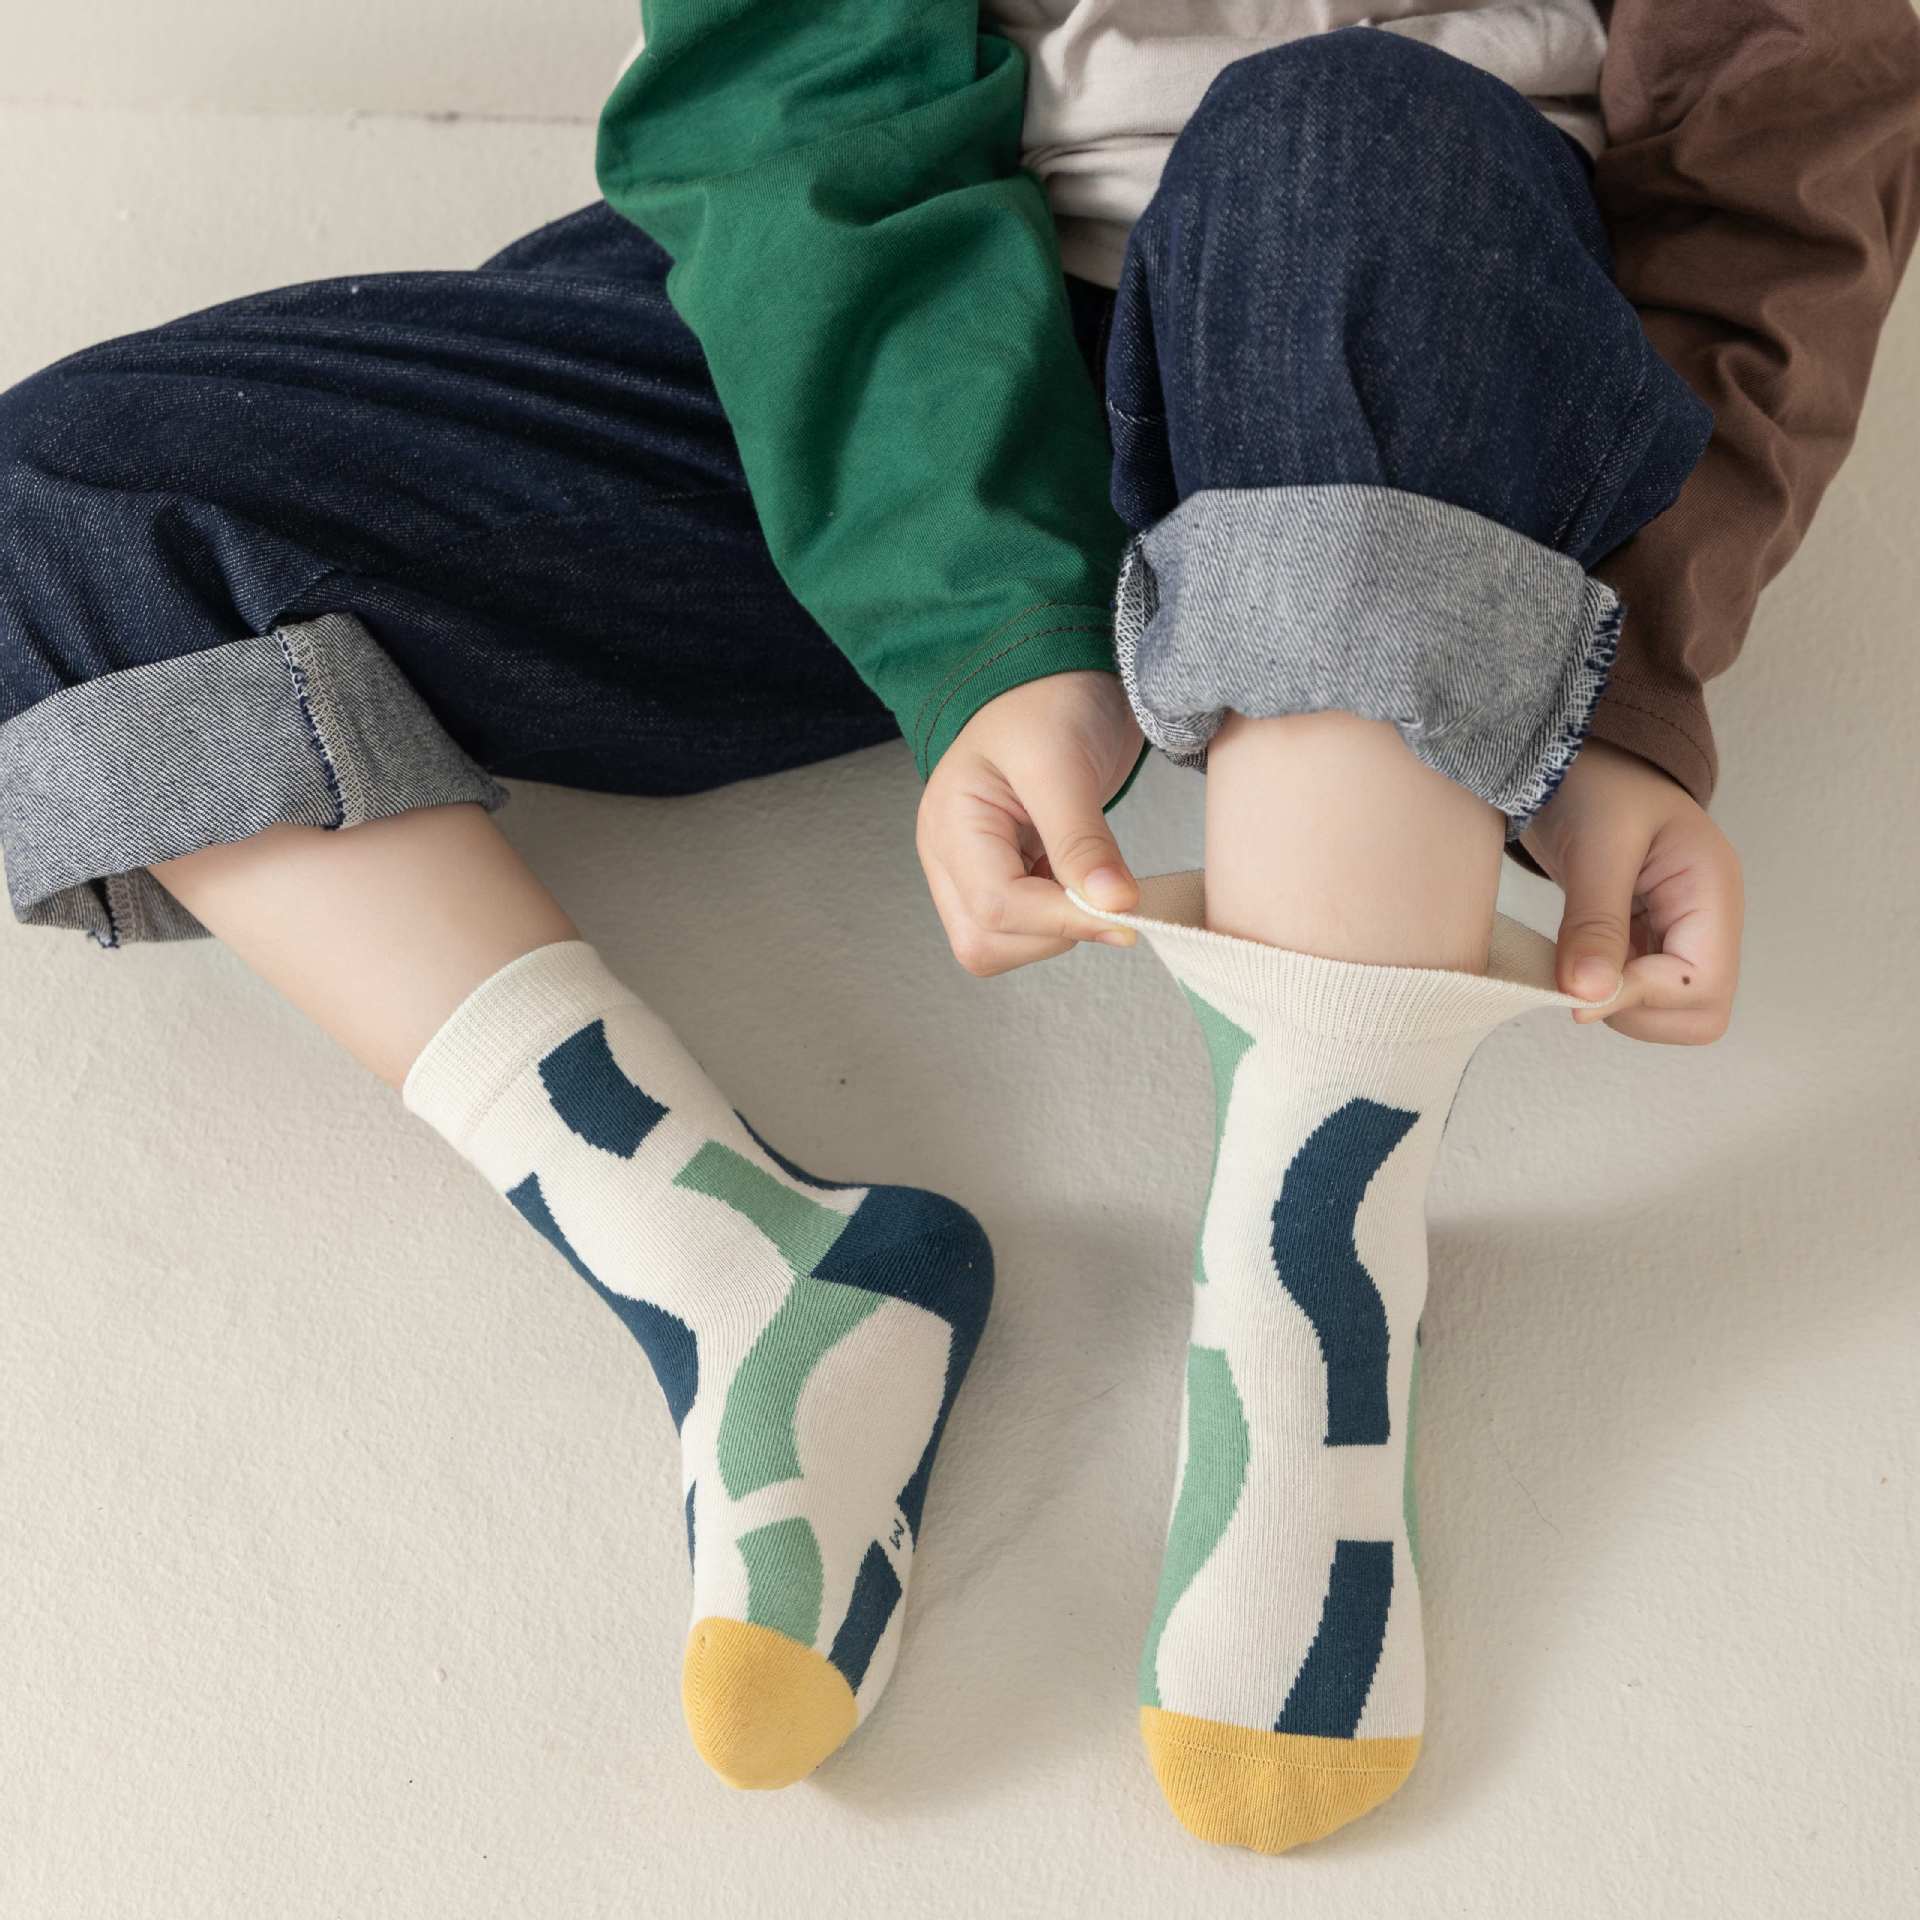 Boys' Cotton SocksSoft Skin-Friendly Not Easy to Pill Tube SocksKorean Style Striped All-Matching Kid's SocksSpring and Autumn New